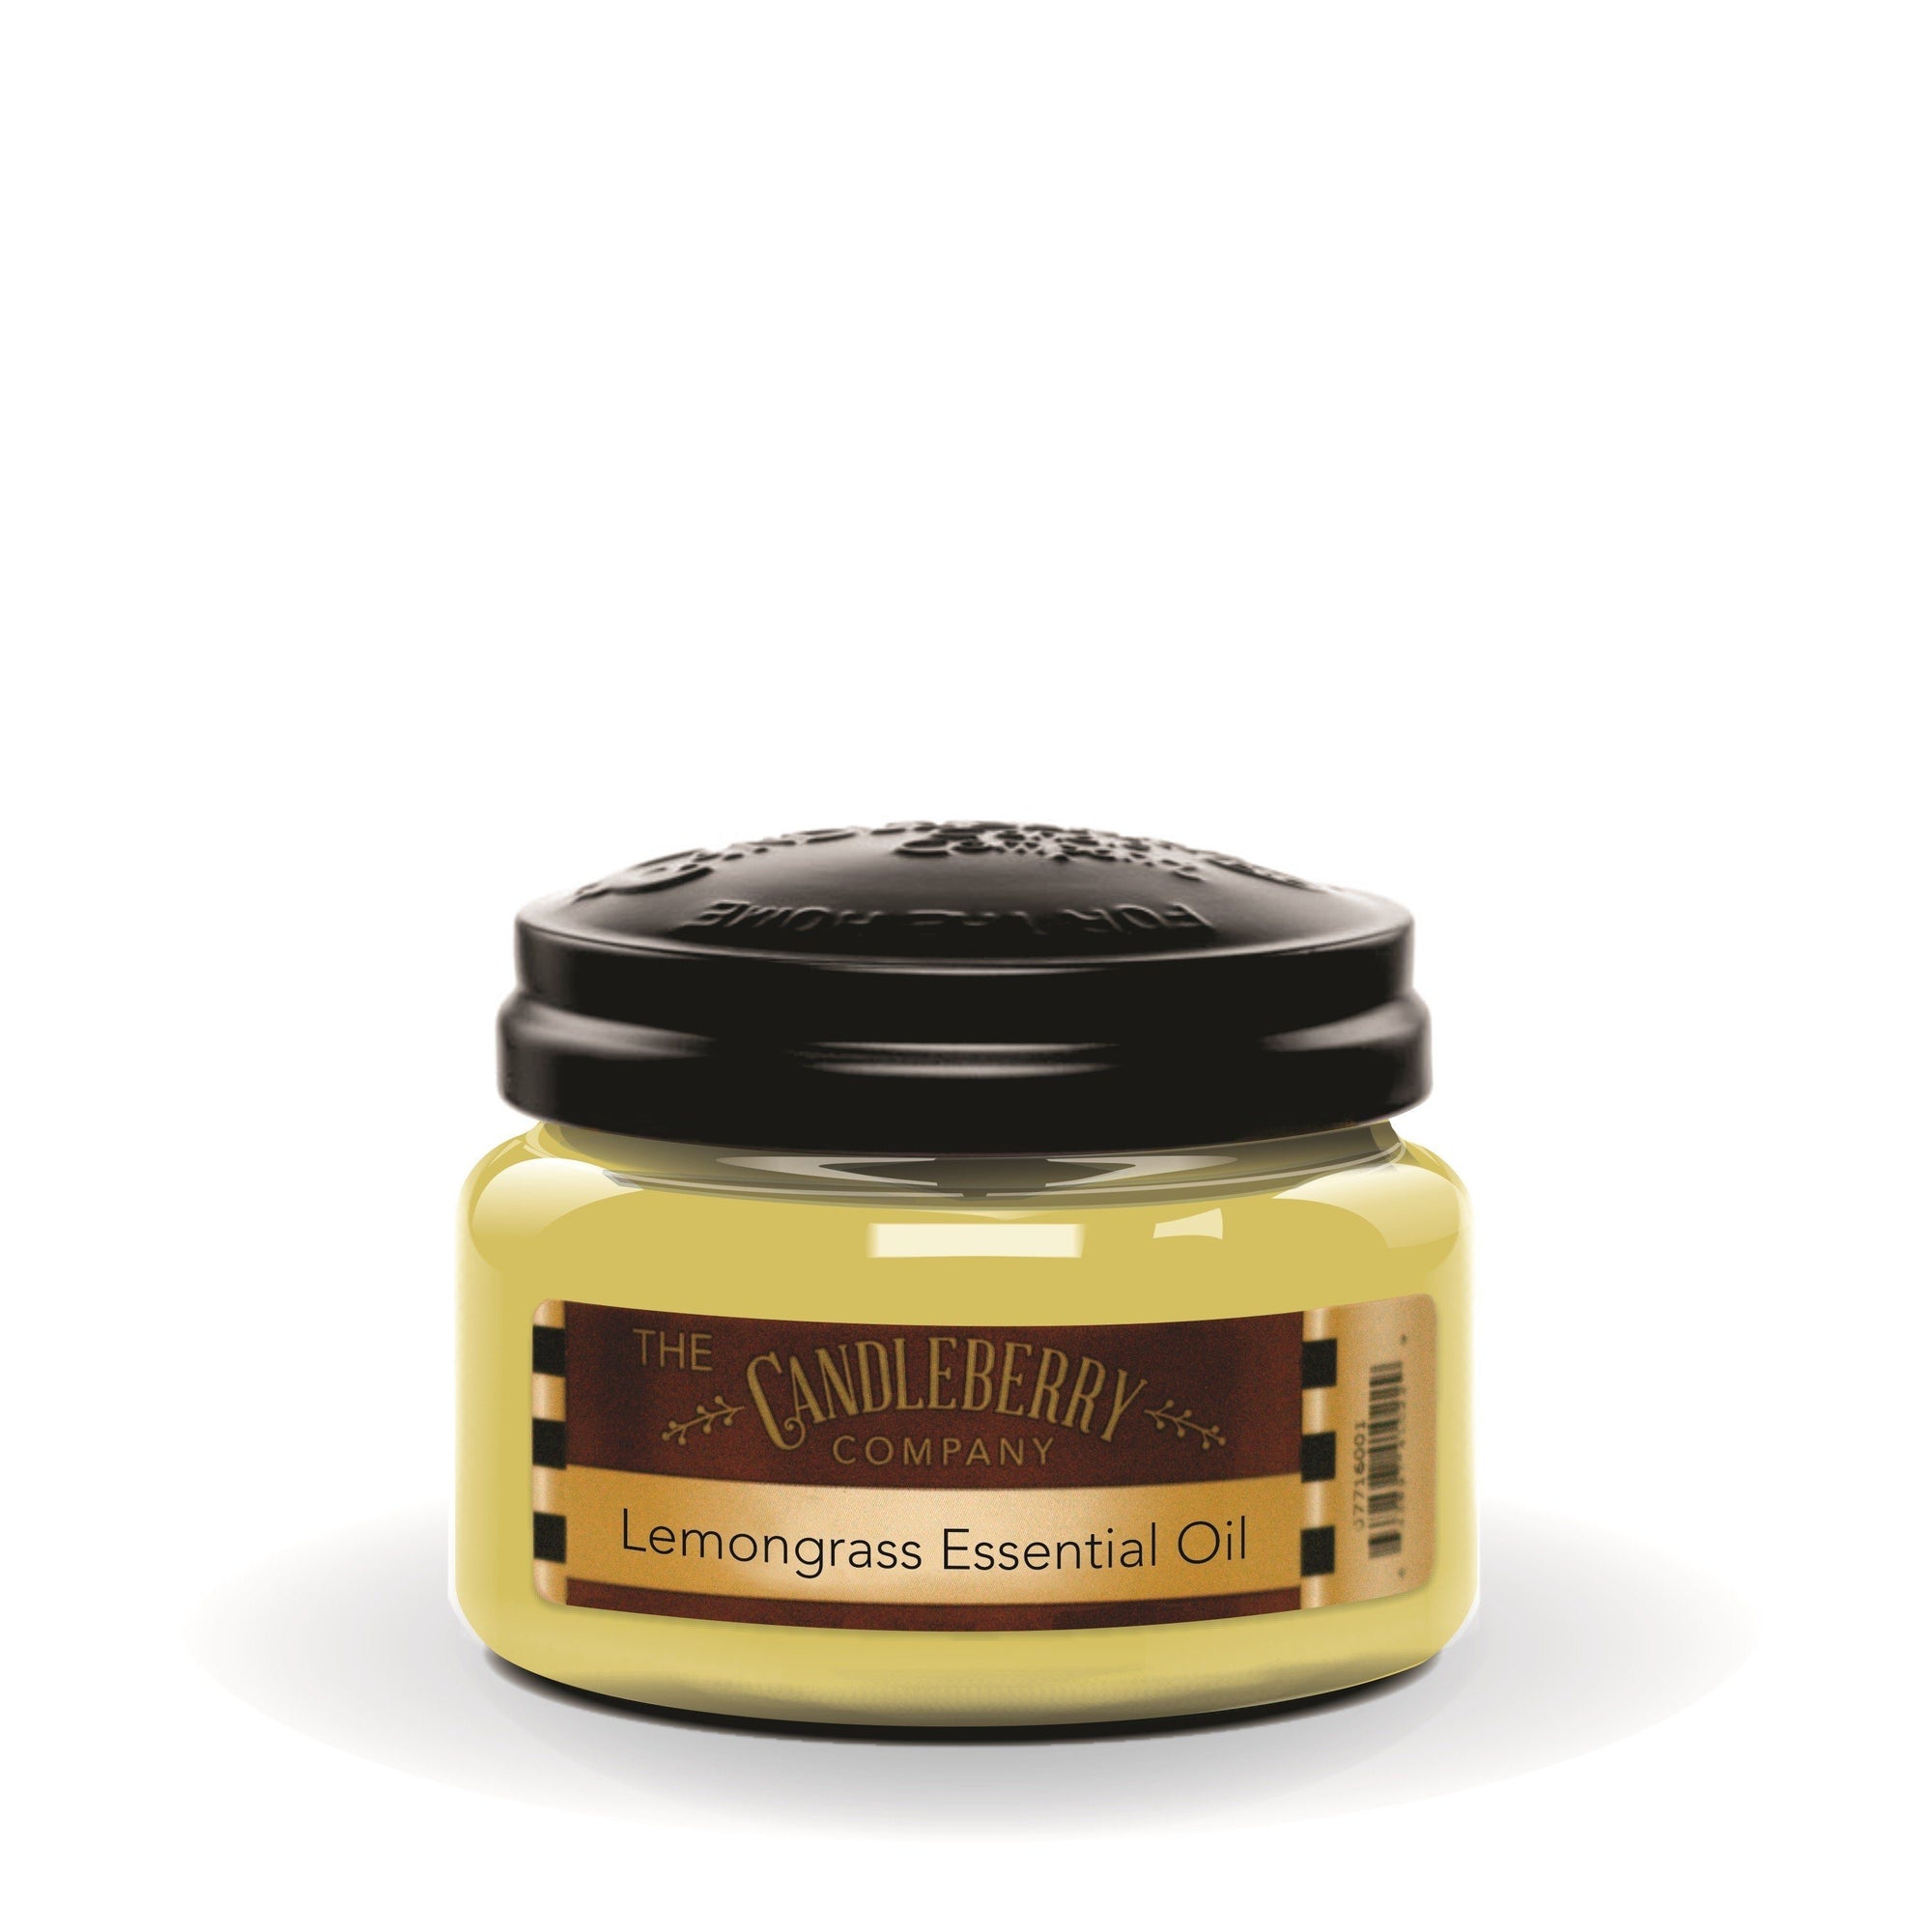 Lemongrass Essential Oil™, 10 oz. Jar, Scented Candle 10 oz. Small Jar Candle The Candleberry Candle Company 